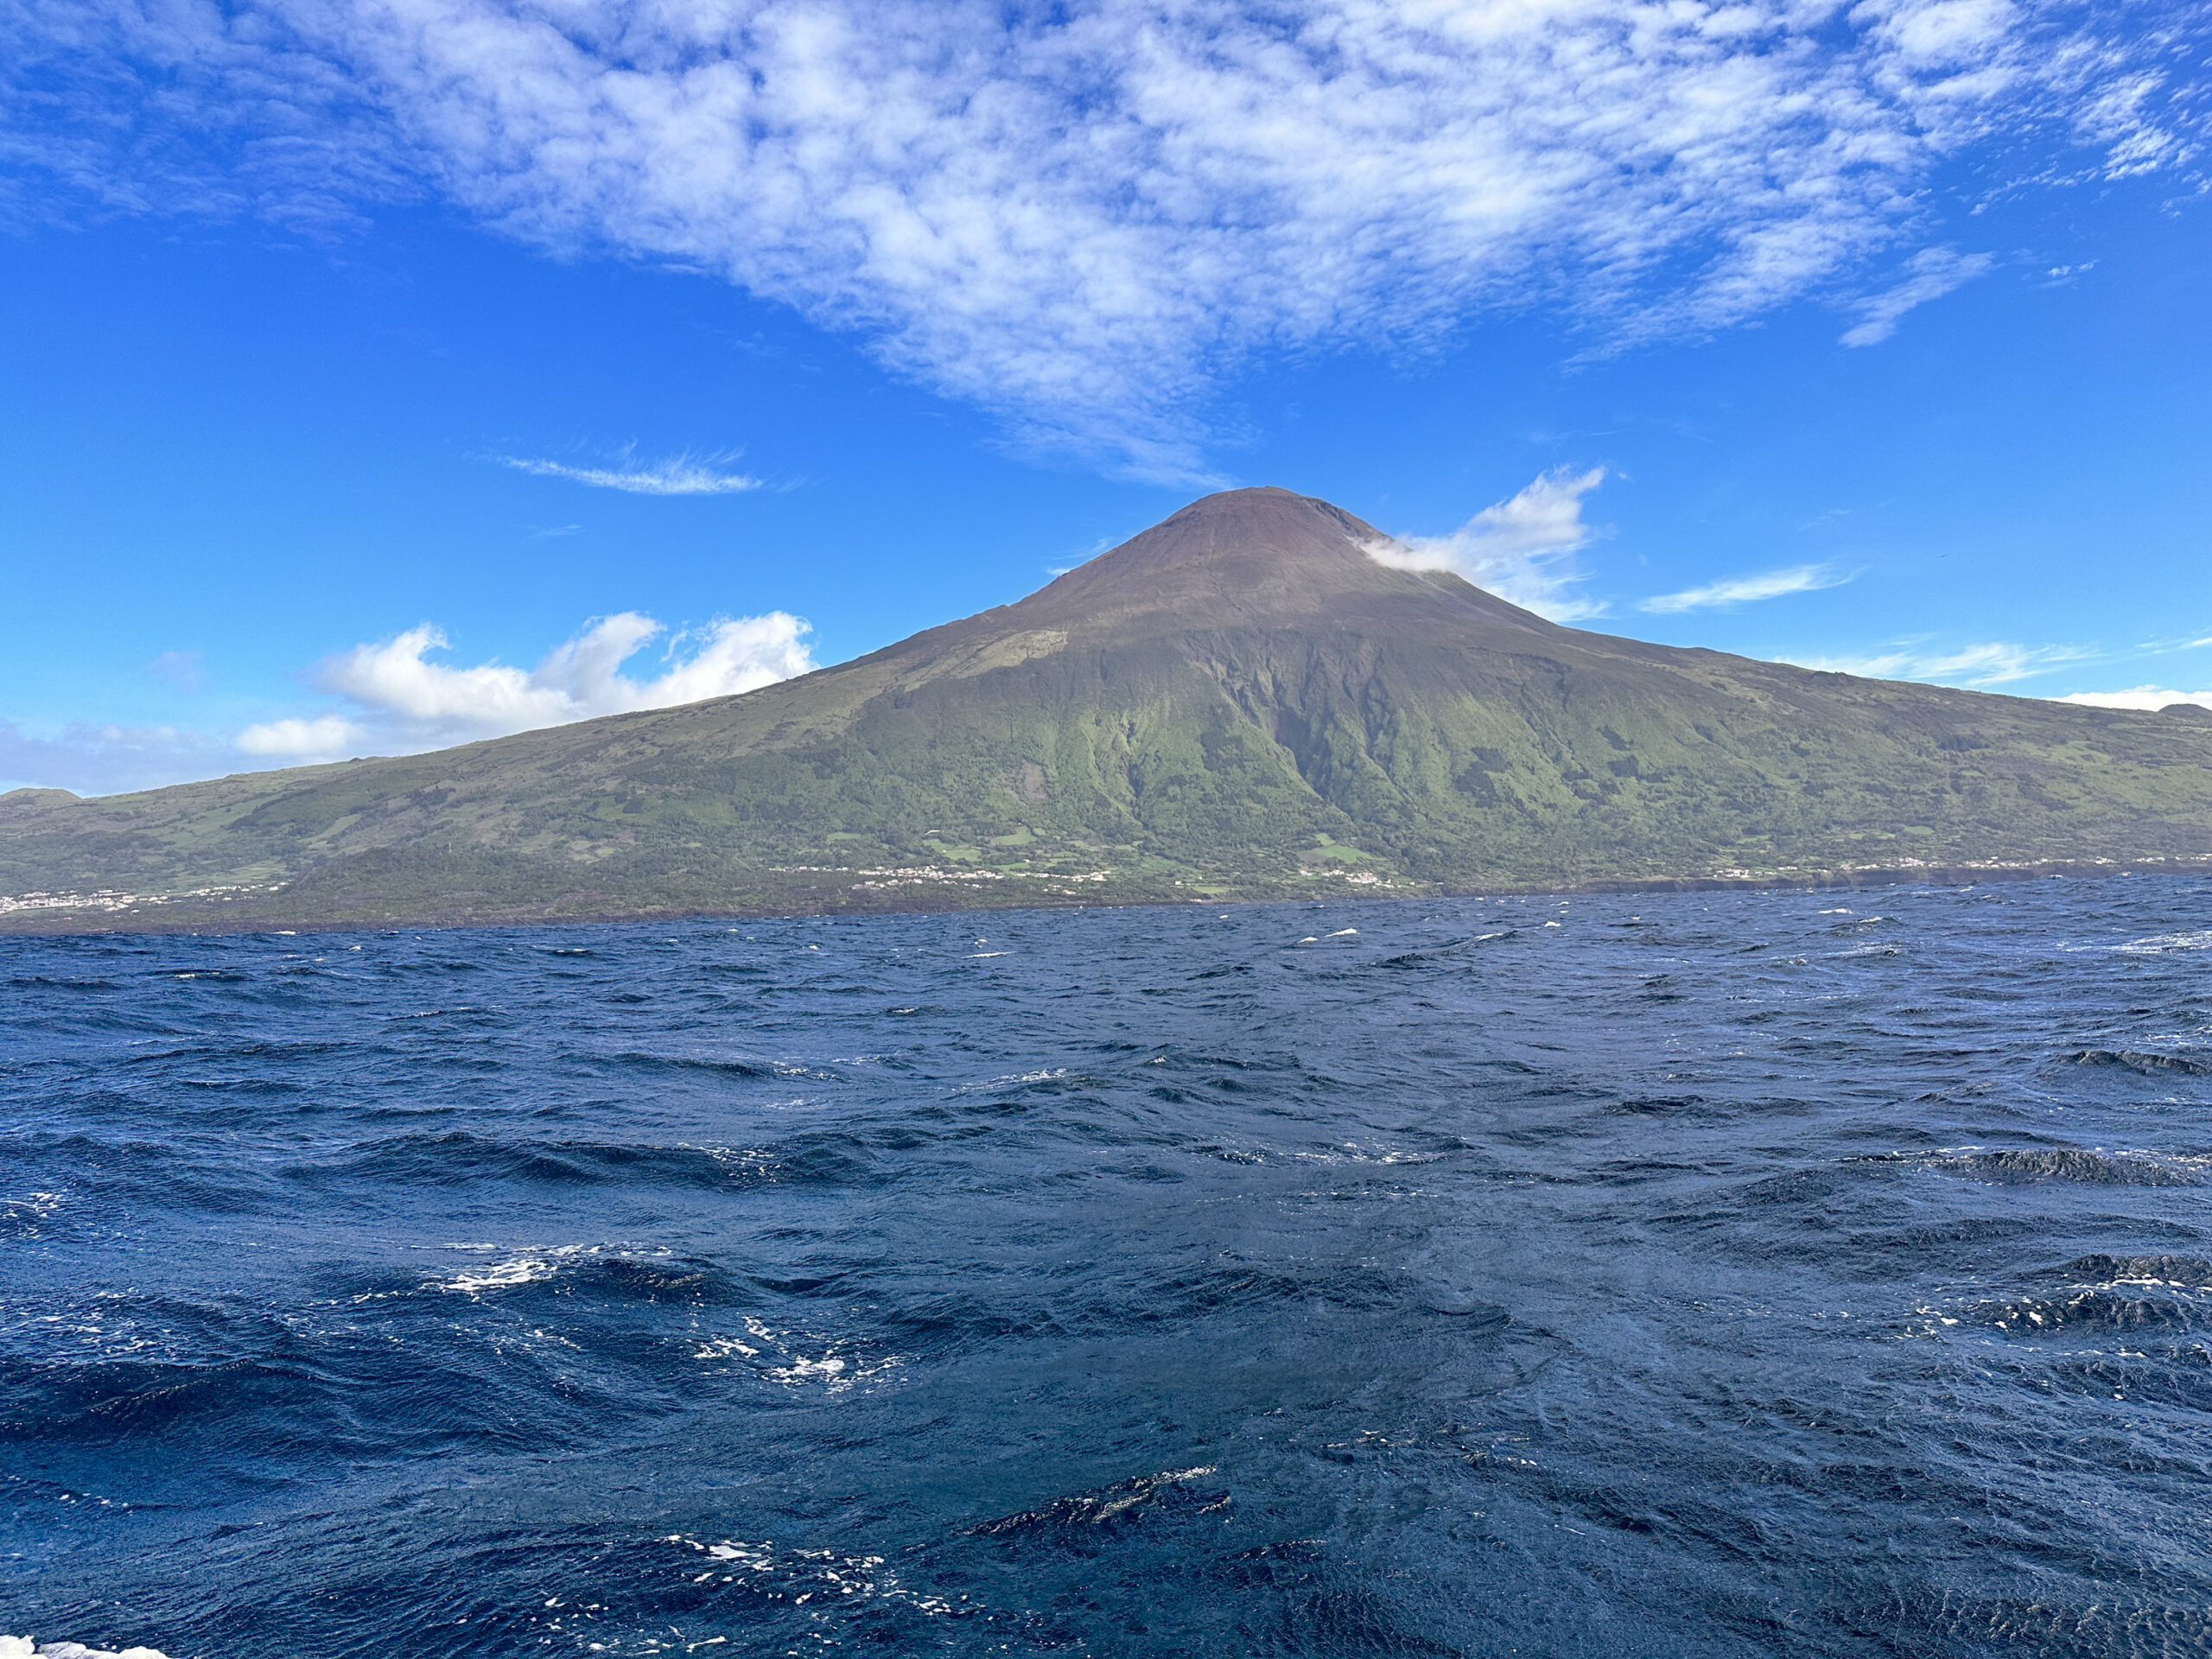 View of Pico Island from sea 